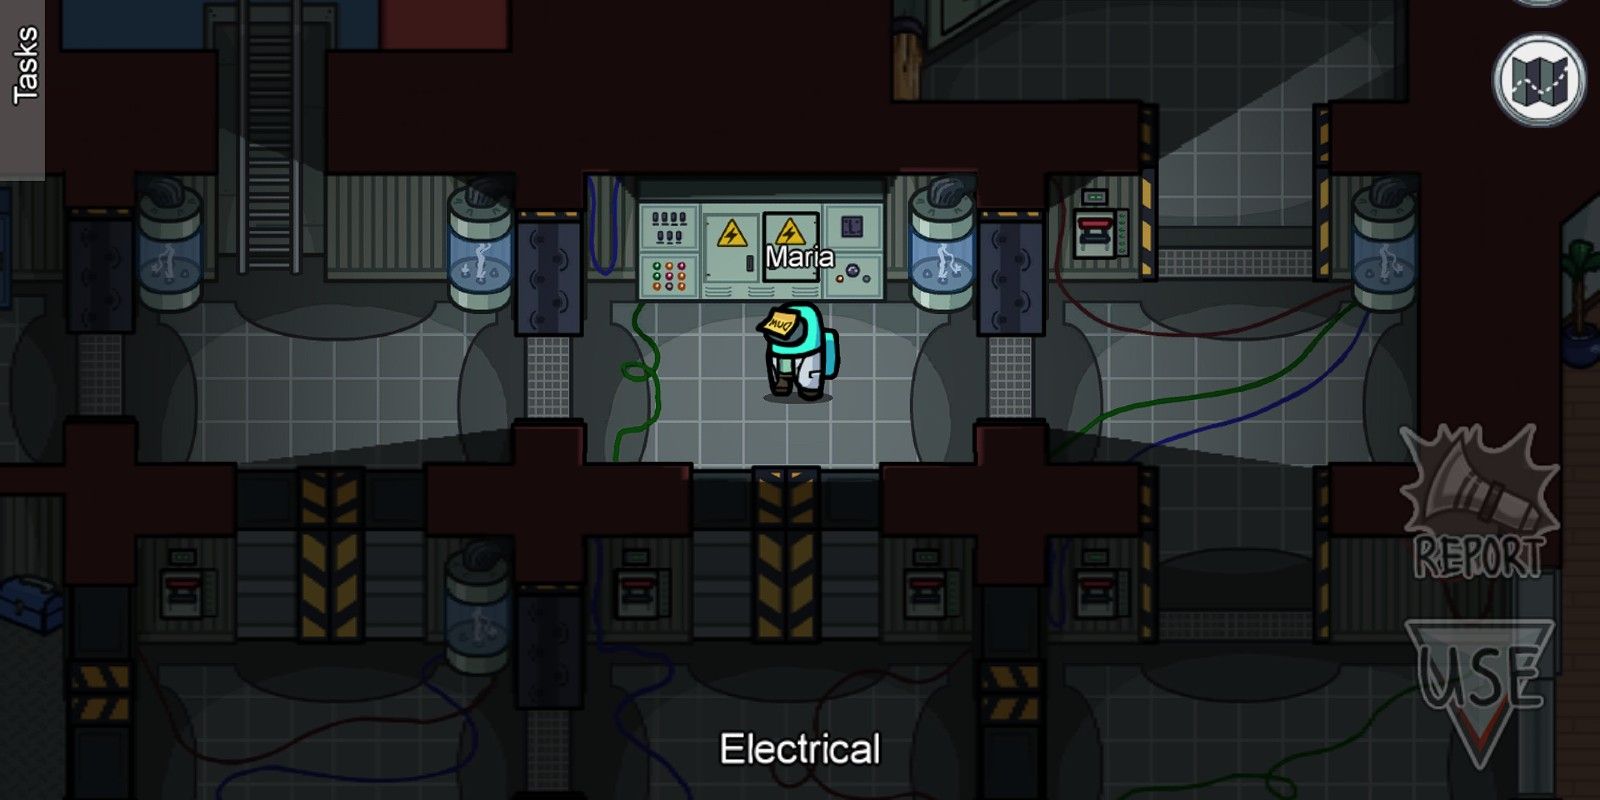 Electrical room on the Airship in Among Us